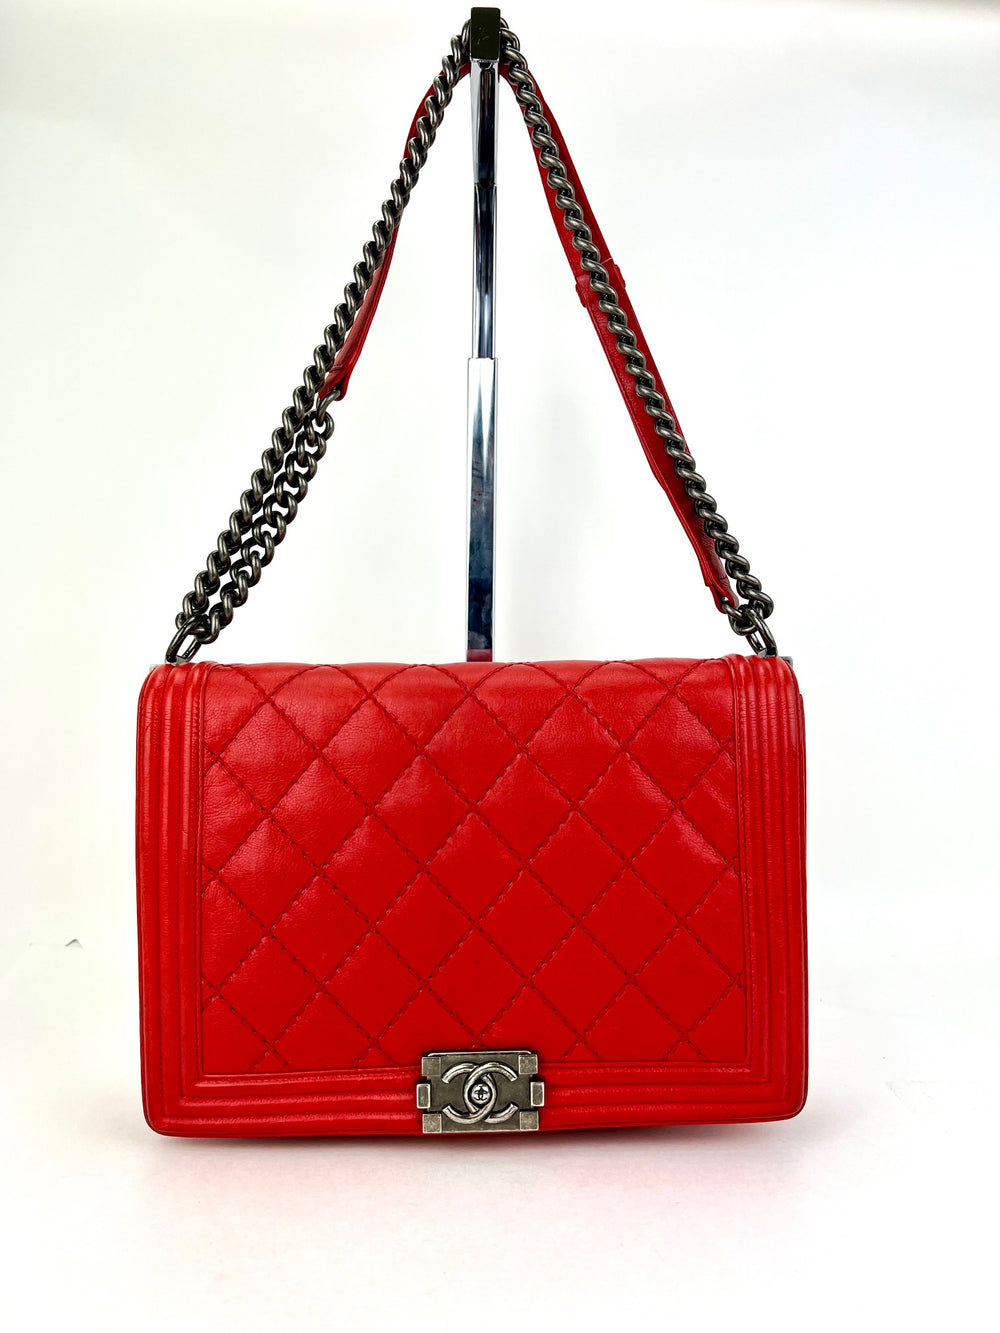 CHANEL  Bags  Rare Vintage Chanel Red Leather Scallopquilted Flap Bag   Poshmark